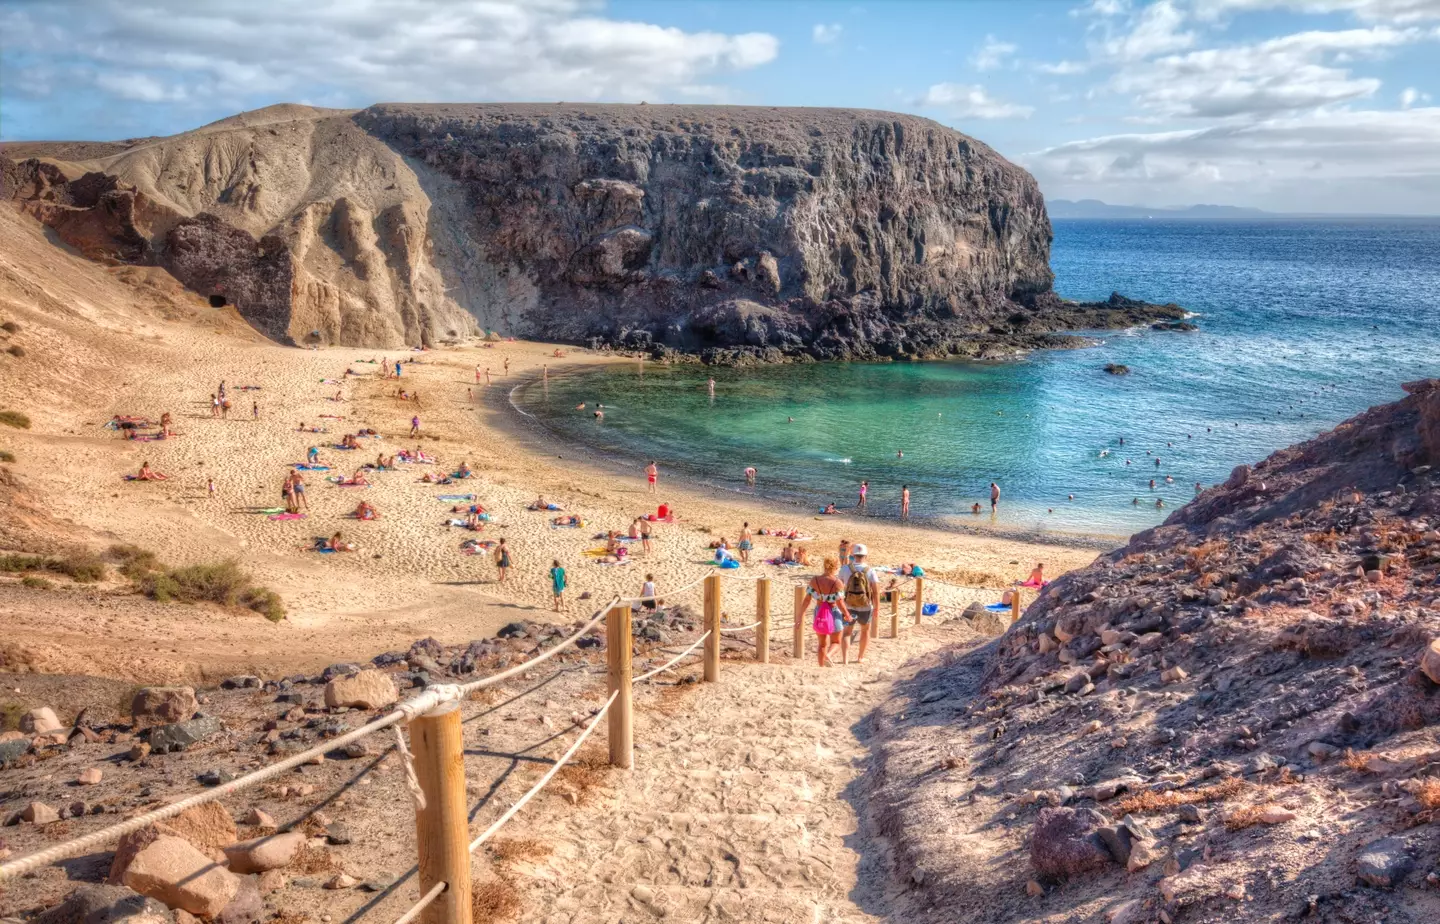 Lanzarote is one of the holiday hotspots under threat.